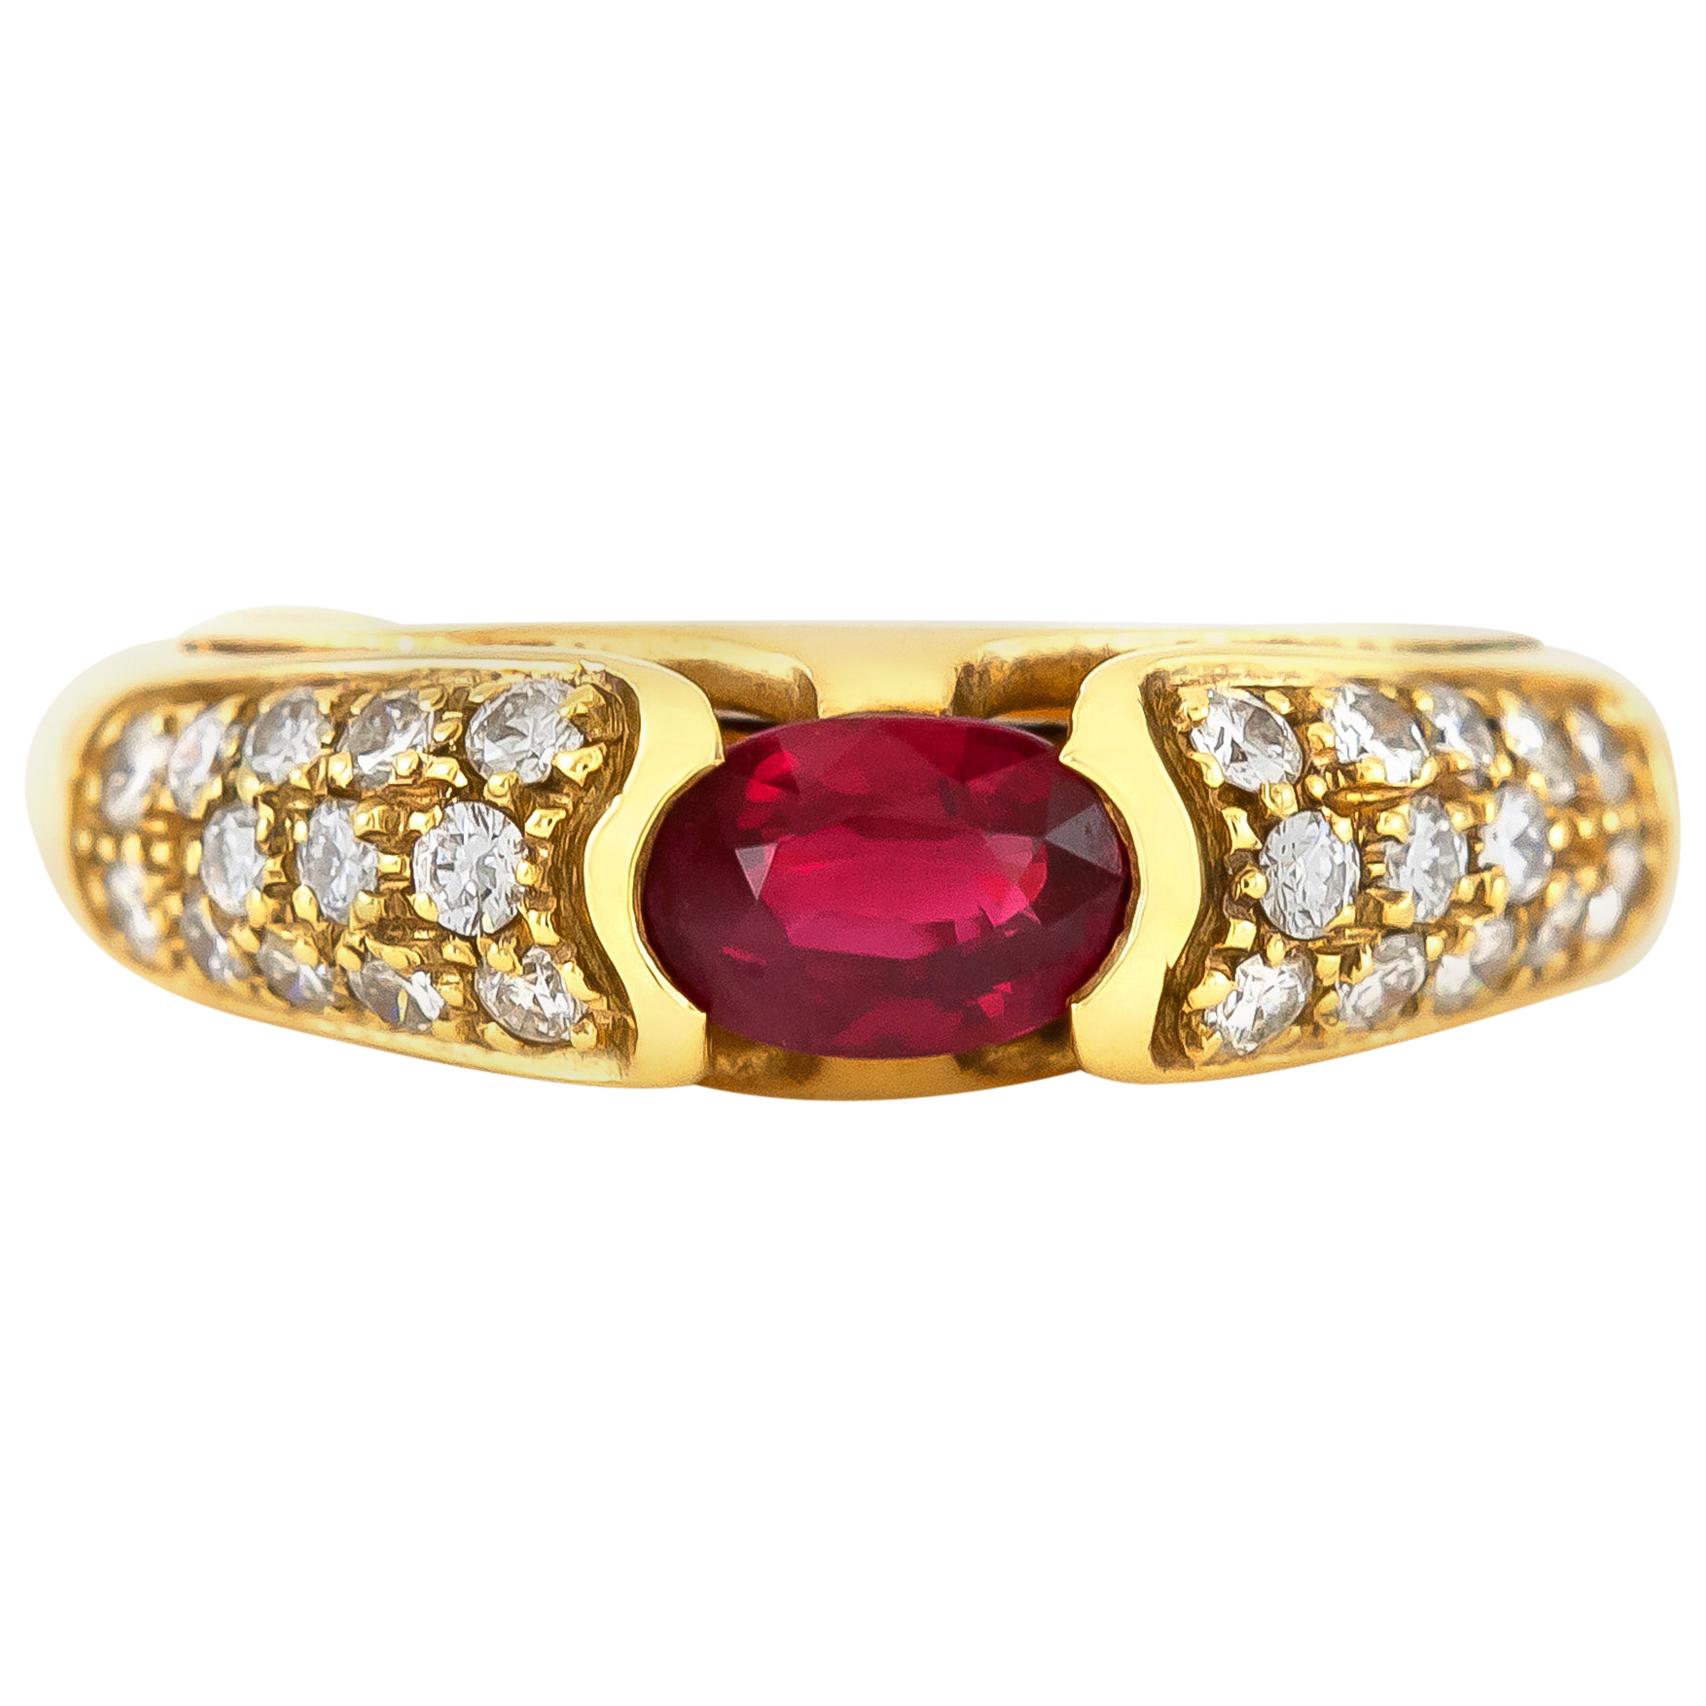 1970s Half Engagement Ring with Center Ruby and Diamonds Ring